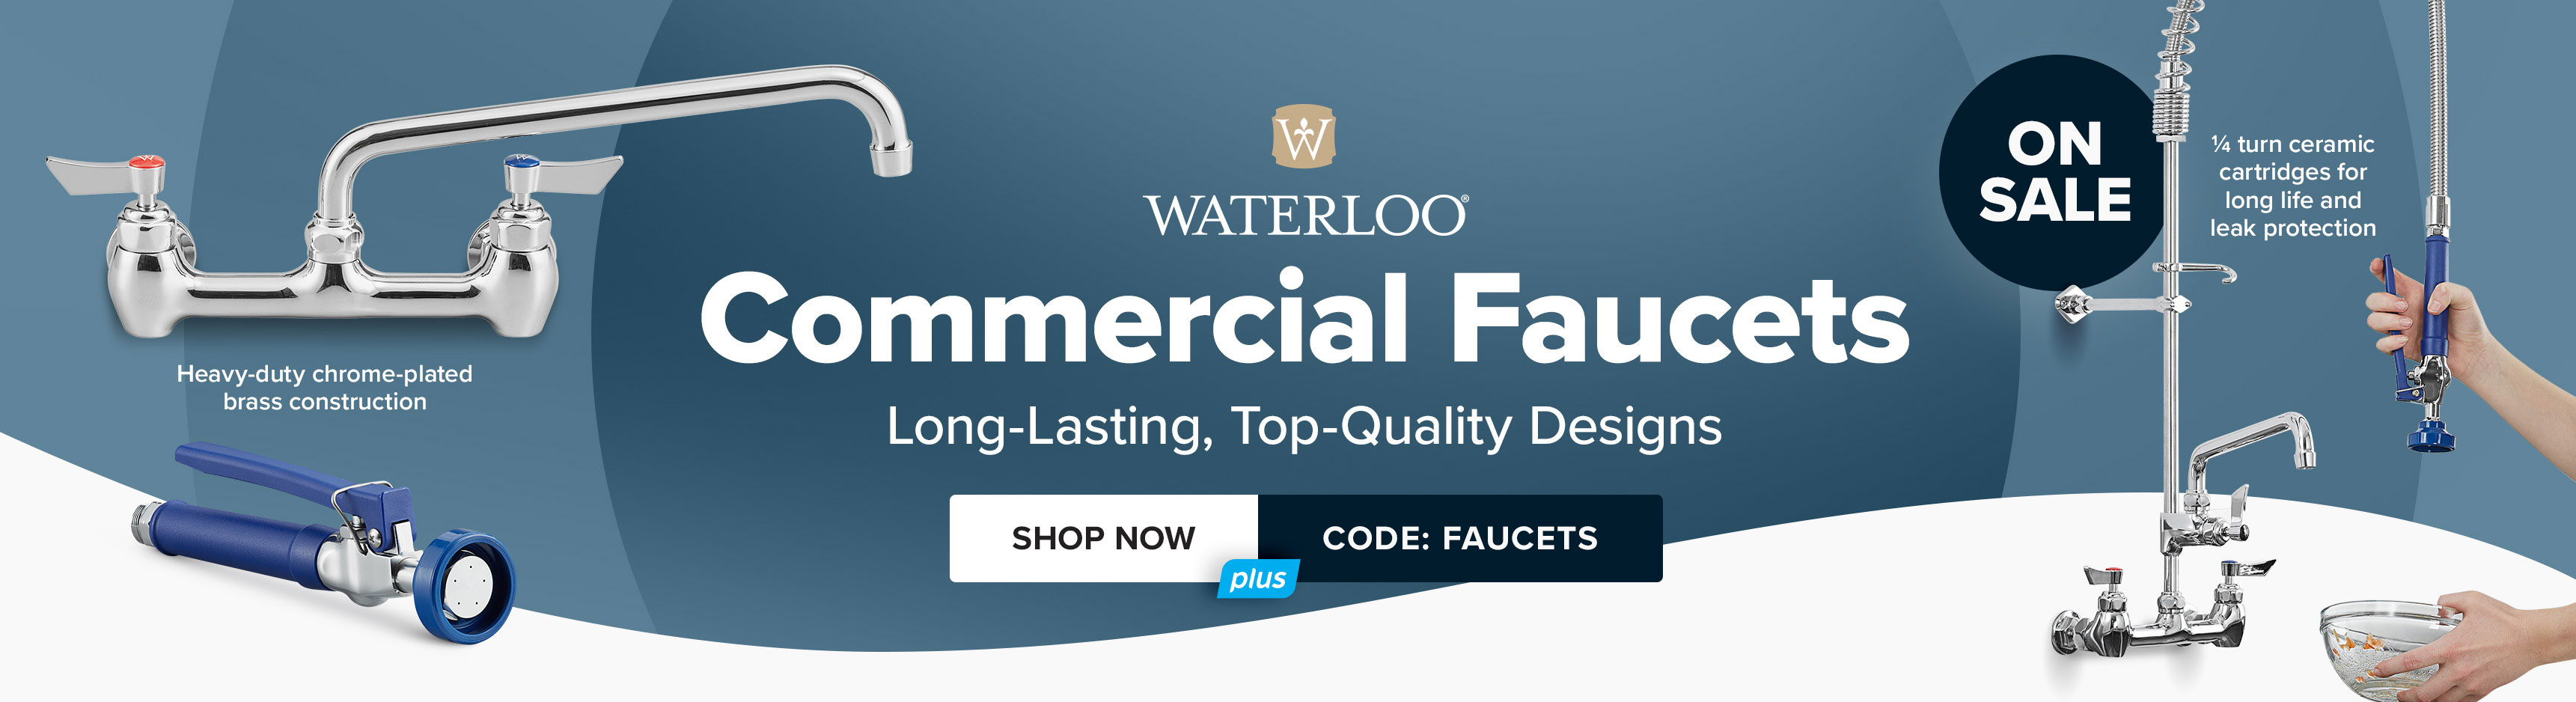 Waterloo Commercial Faucets On Sale for a limited time